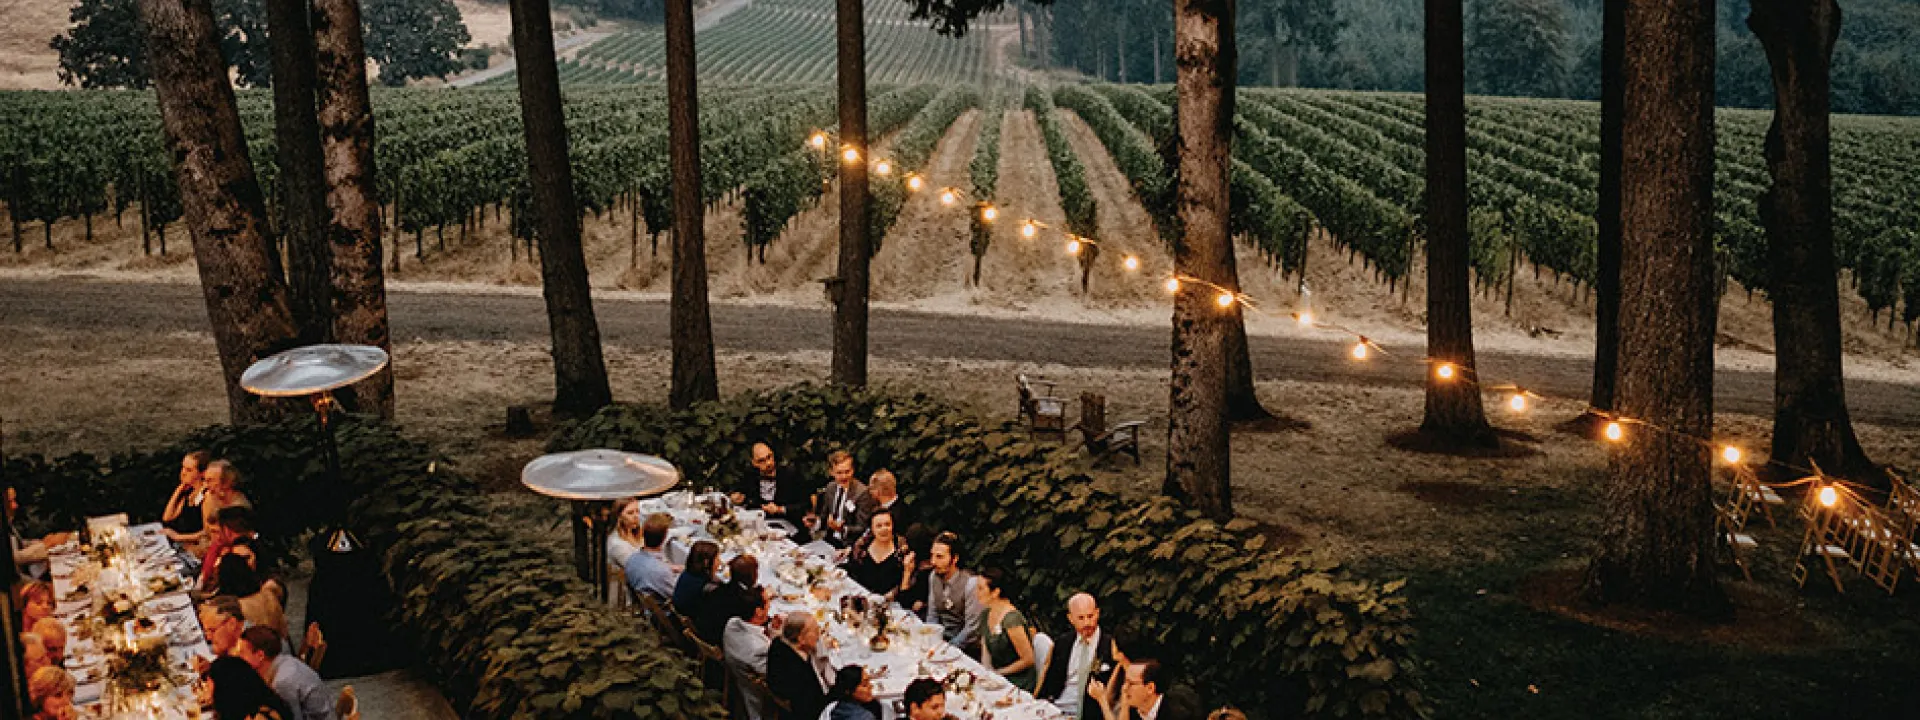 The Vista Hills Vineyard event space in Dayton is surrounded by vines and a grove of oak trees